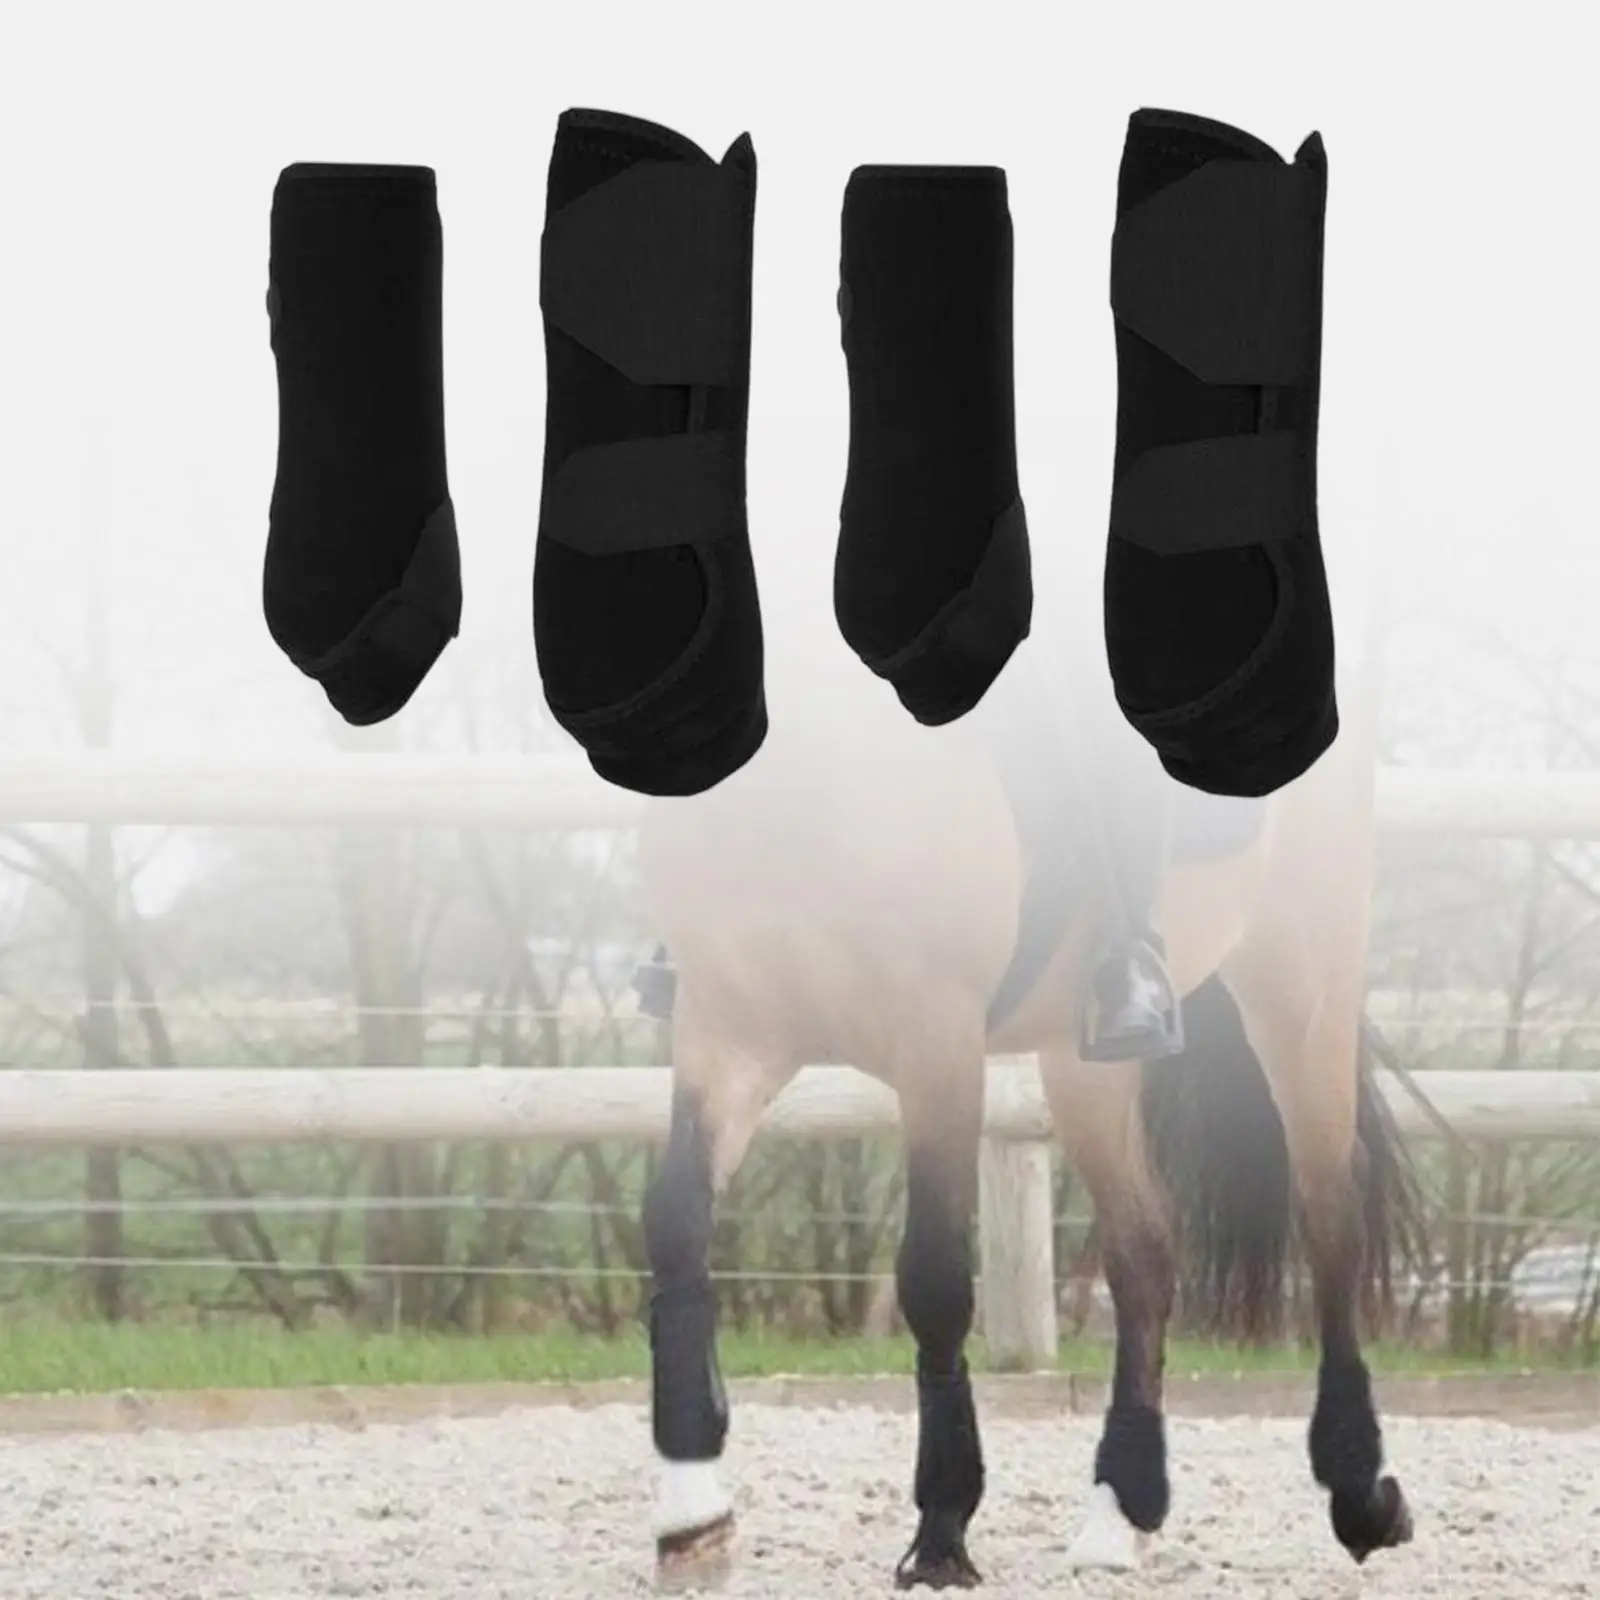 4x Neoprene Horse Boots Leg Wraps Shockproof Tendon Protection Protector Gear for Jumping Training Riding Equestrian Accessories